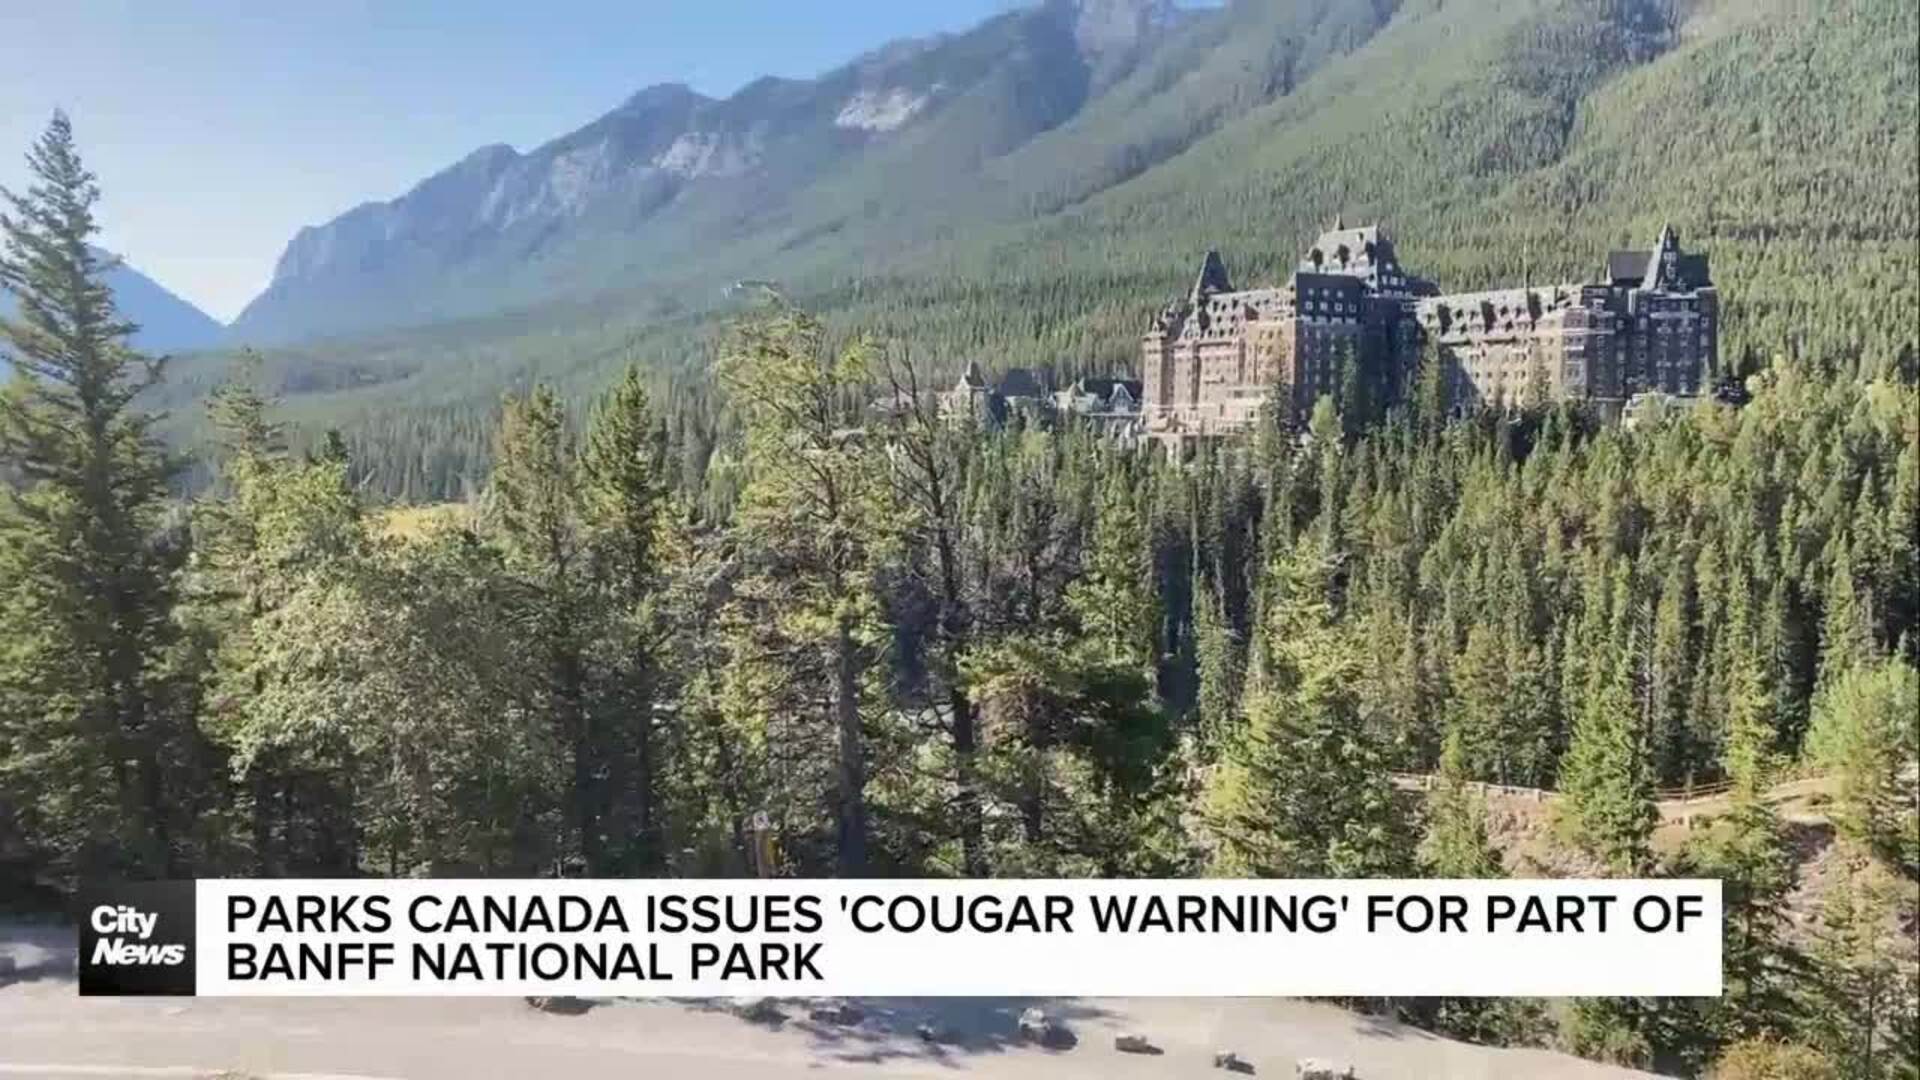 Cougar warning issued for part of Banff National Park